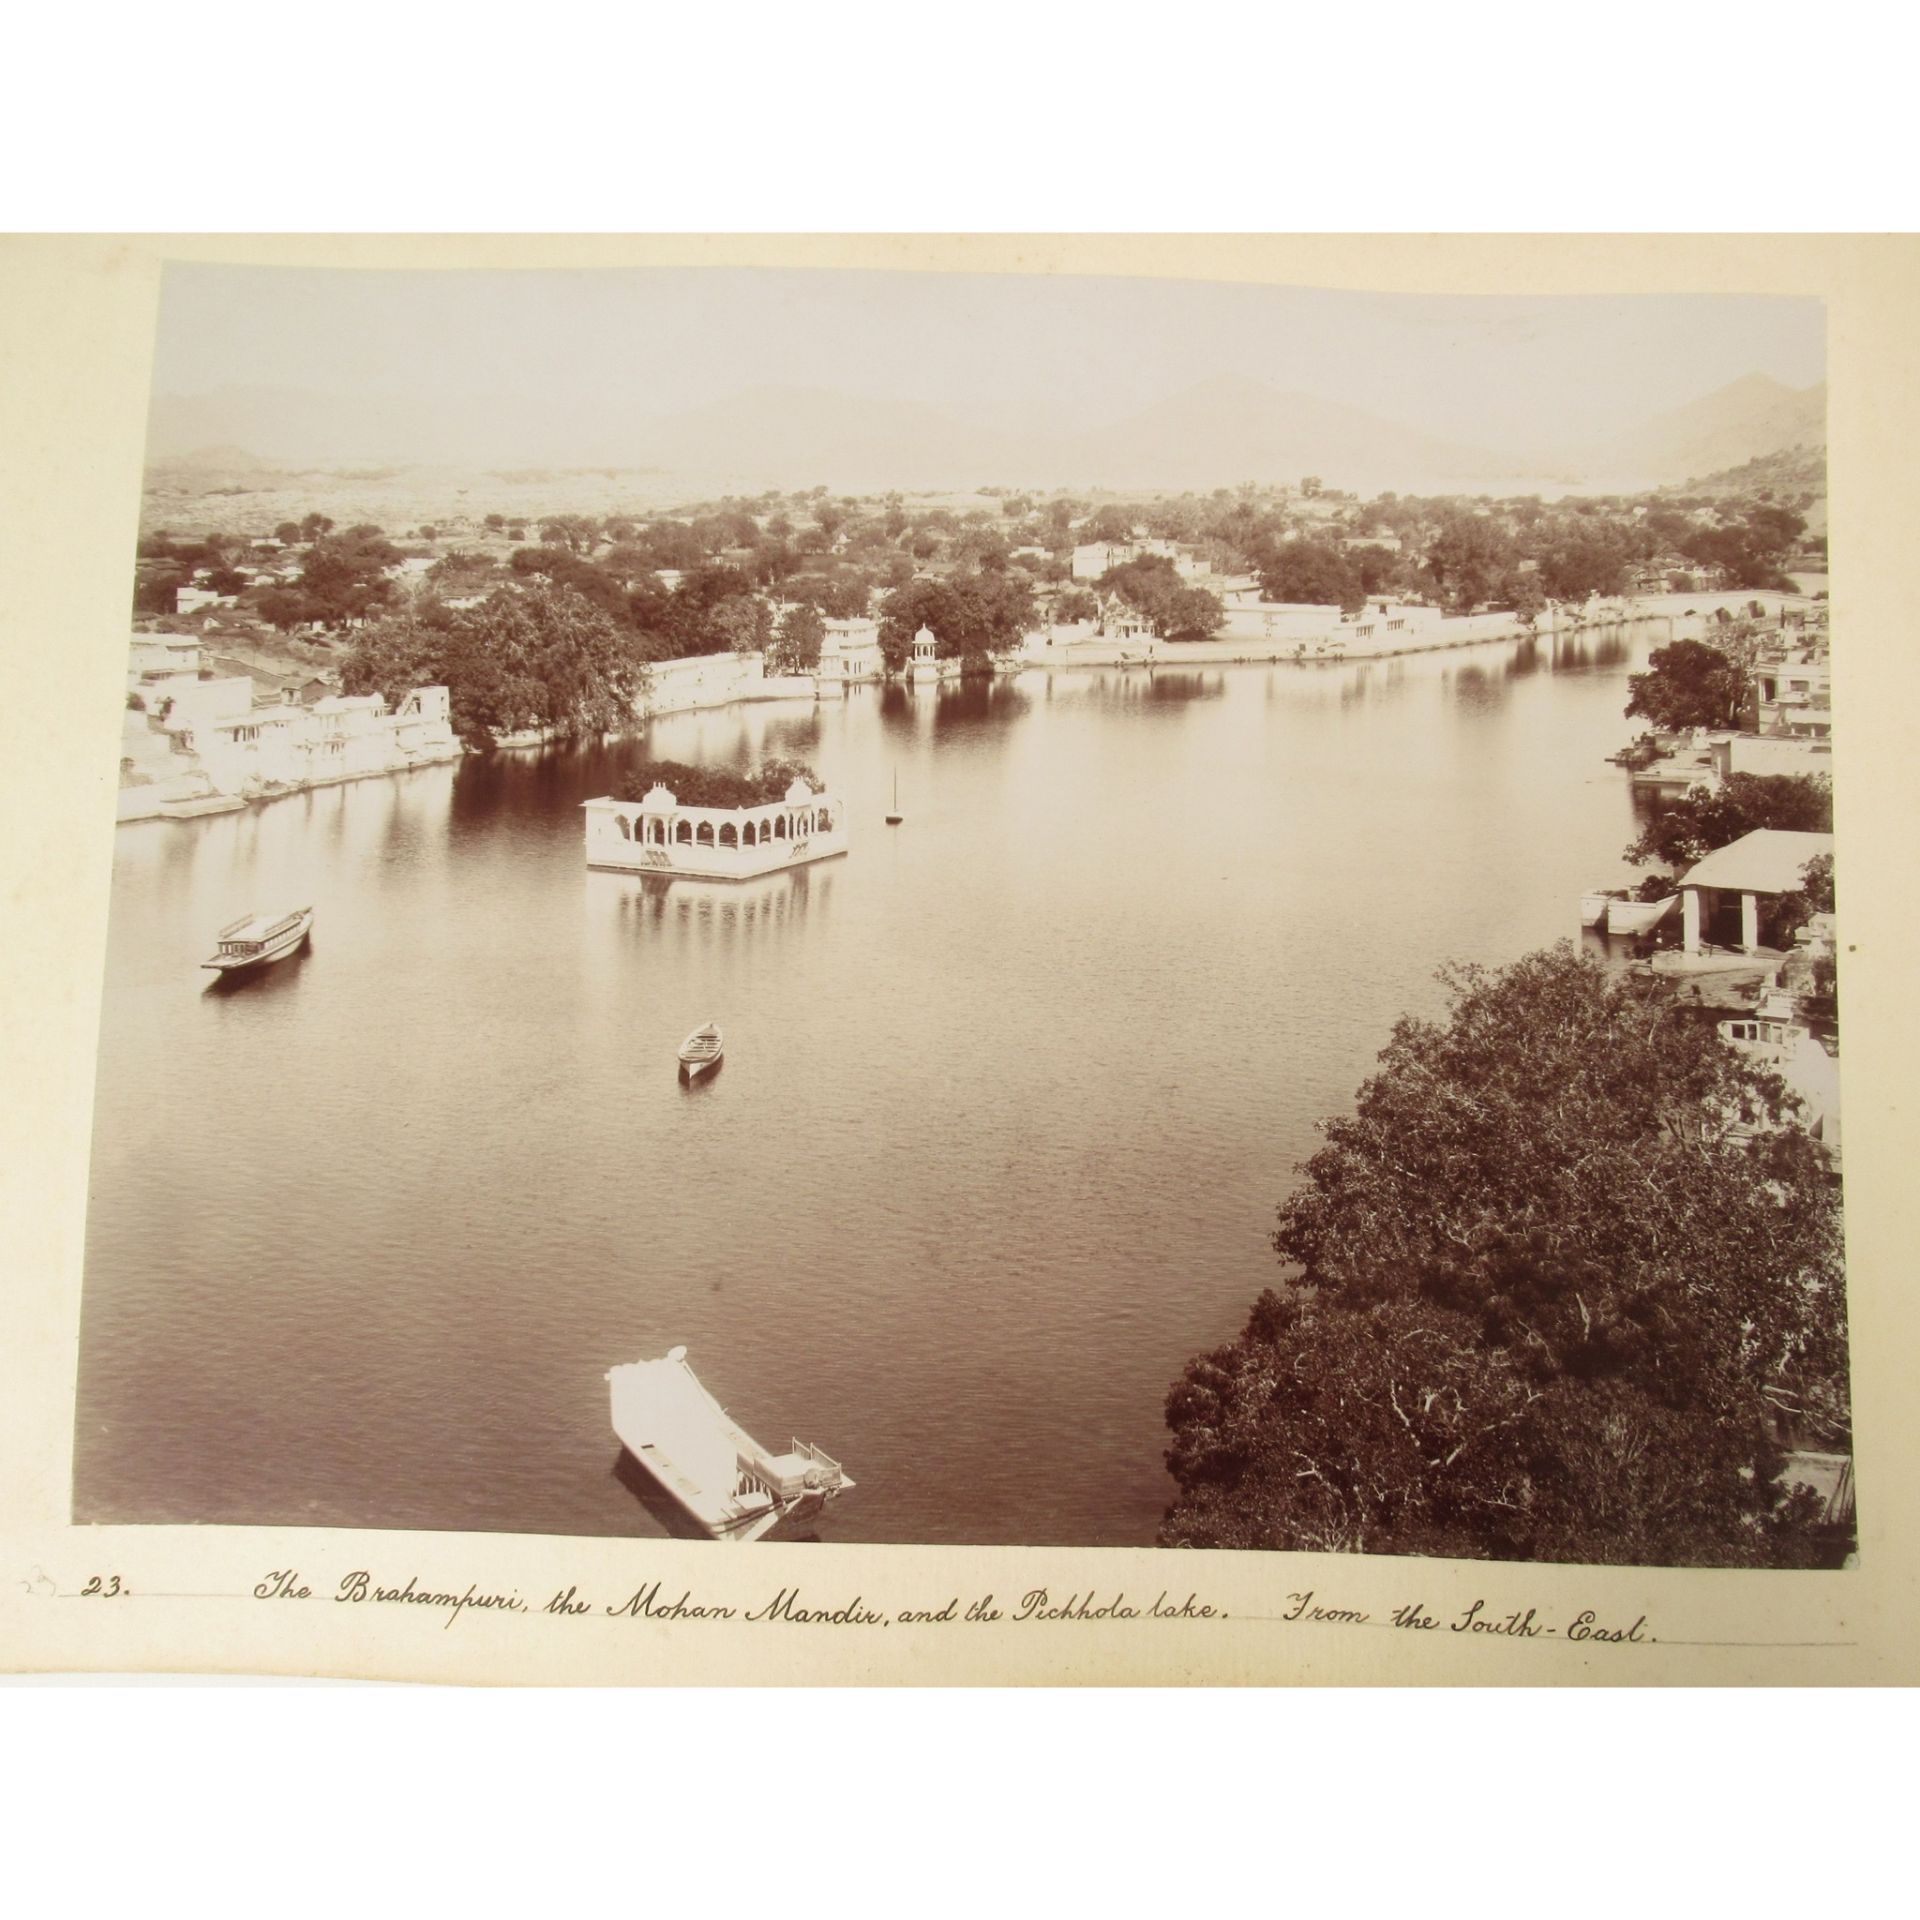 India: a photograph album Photographs of Rajasthan by Mohan Lal of Udaipur, late 19th century - Image 17 of 23